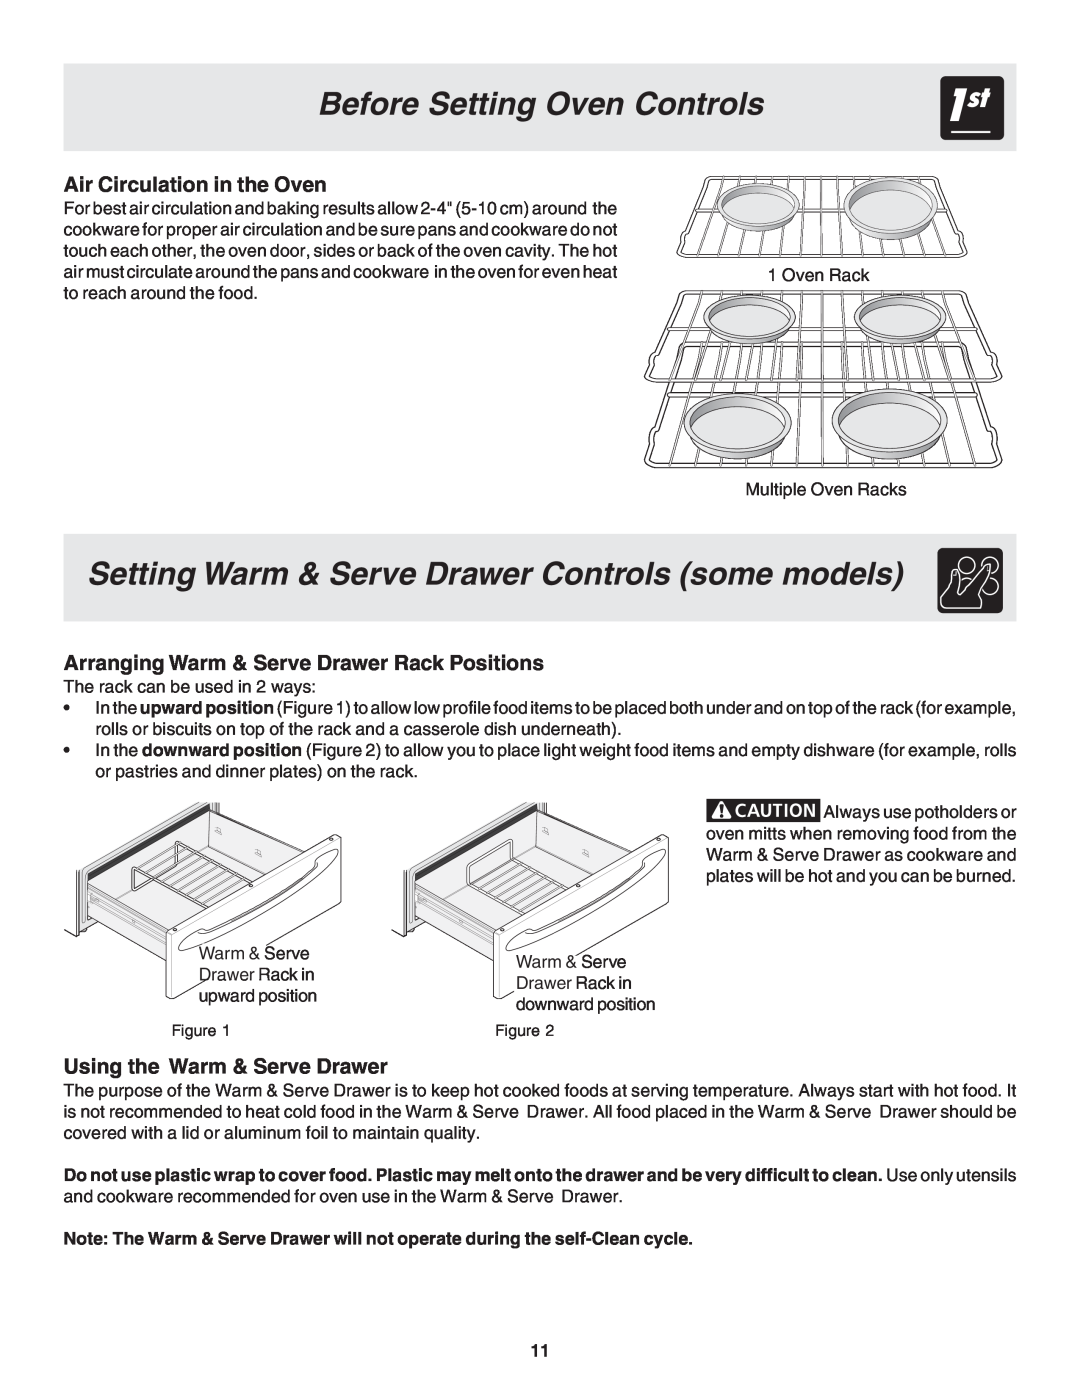 Frigidaire 318203870 warranty Setting Warm & Serve Drawer Controls some models, Air Circulation in the Oven 